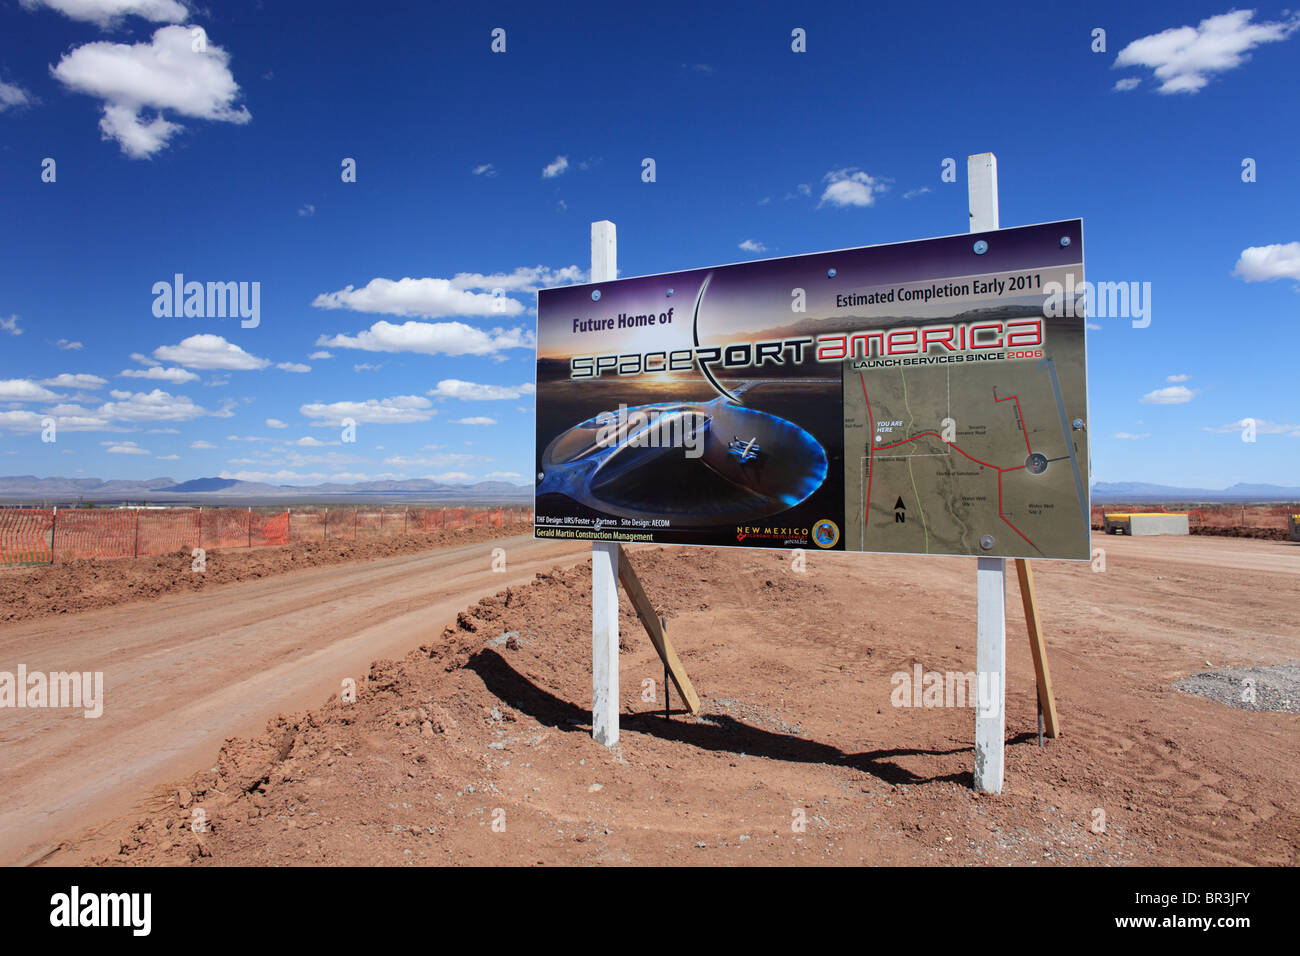 General view of the entrance to Spaceport America, a commercial spaceport under construction in rural New Mexico. Stock Photo